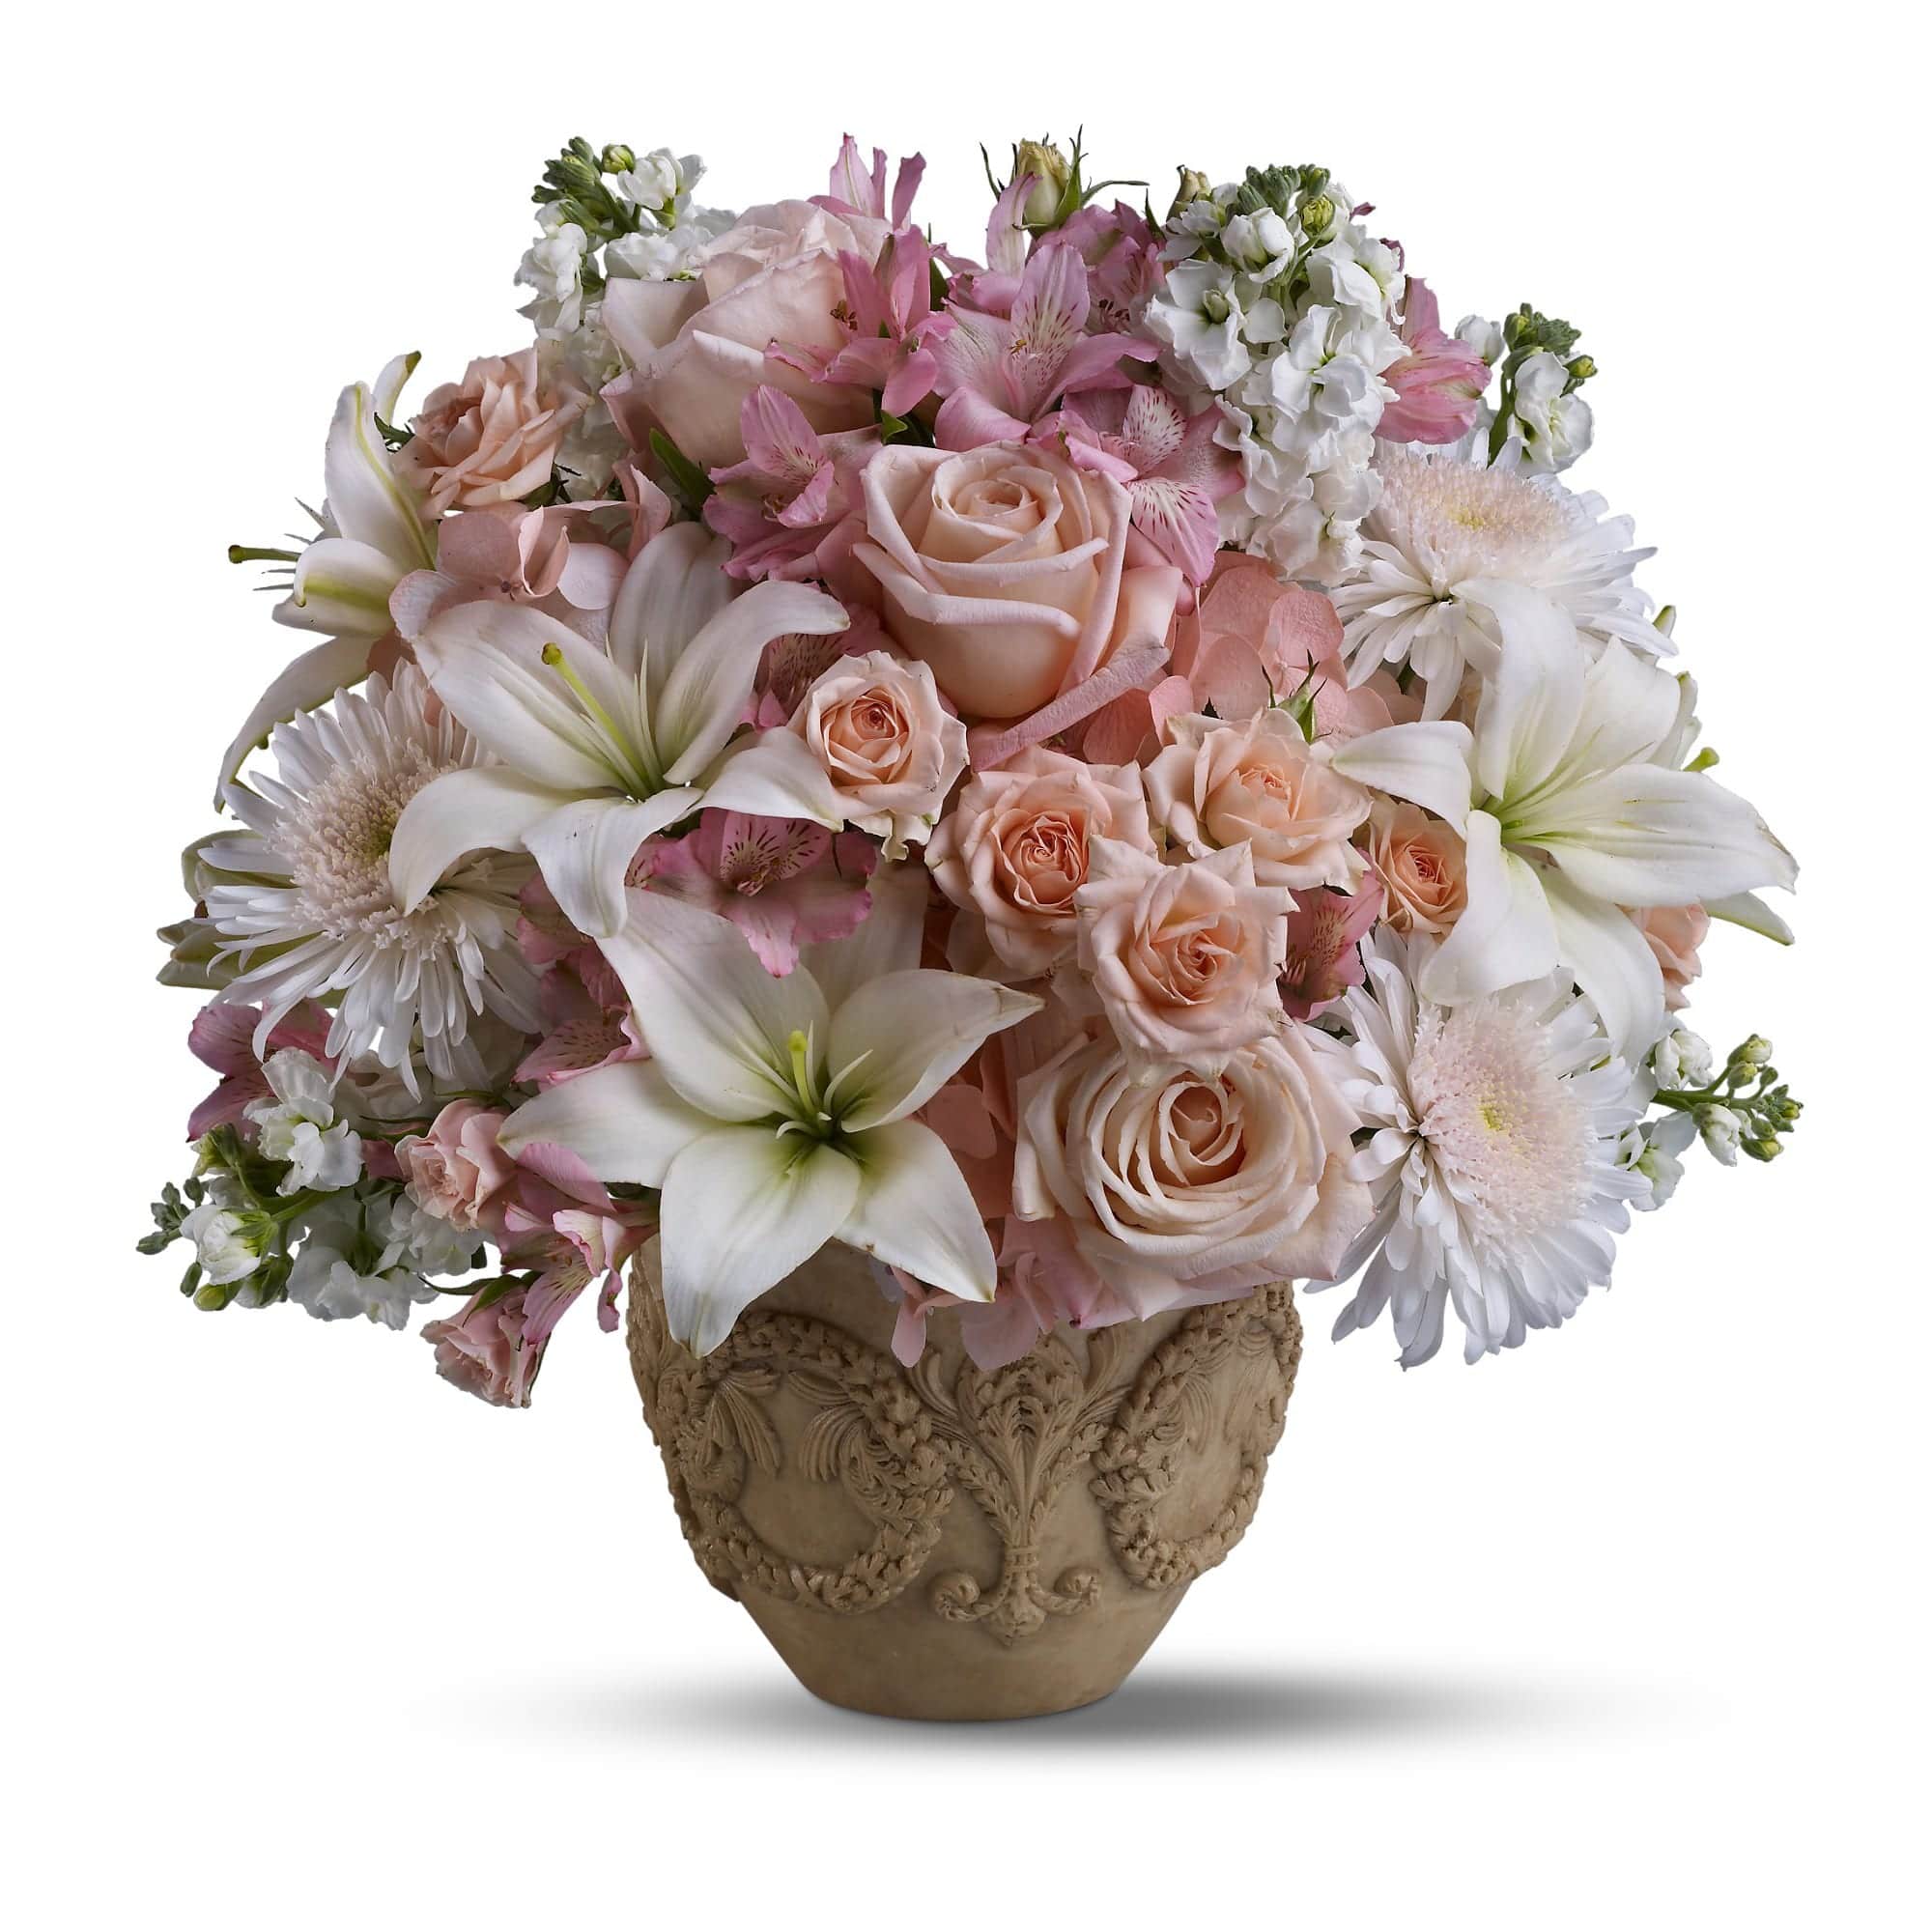 hydrangea, roses and alstroemeria are mixed with white flowers